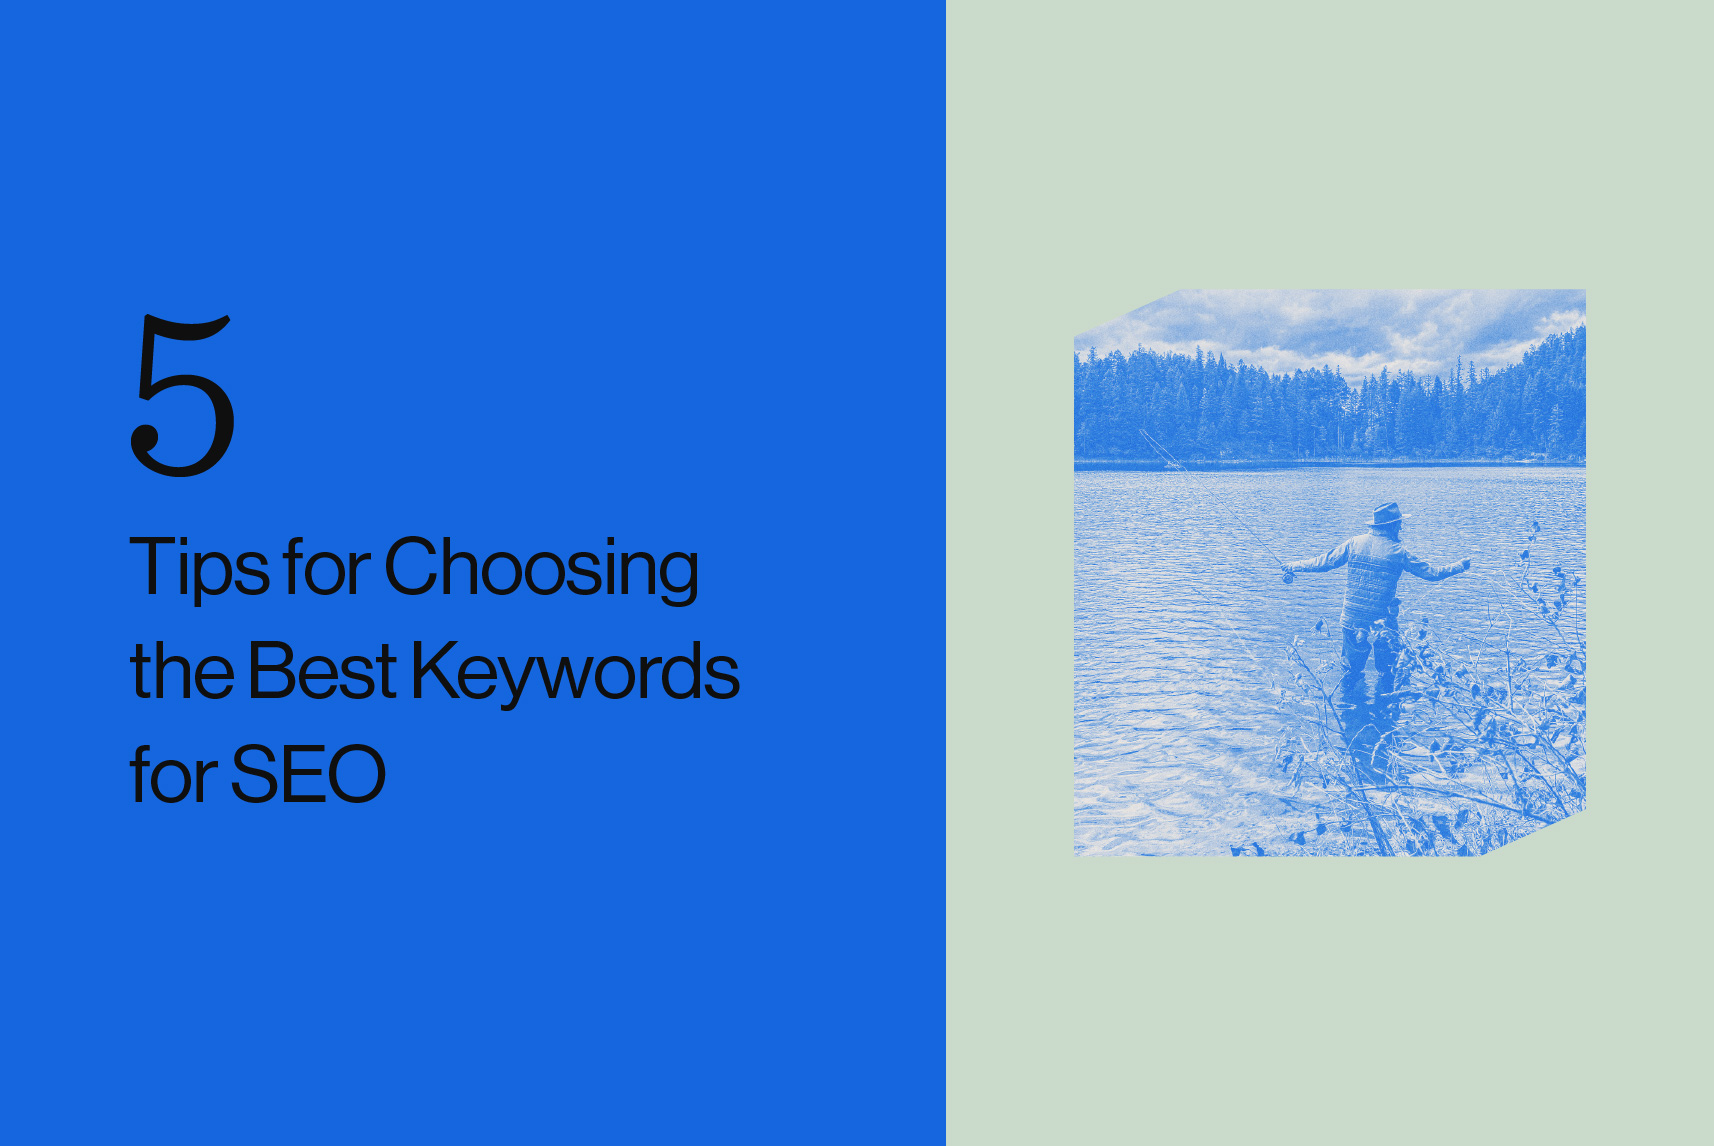 How to Choose the Best Keywords for SEO: 5 Tips